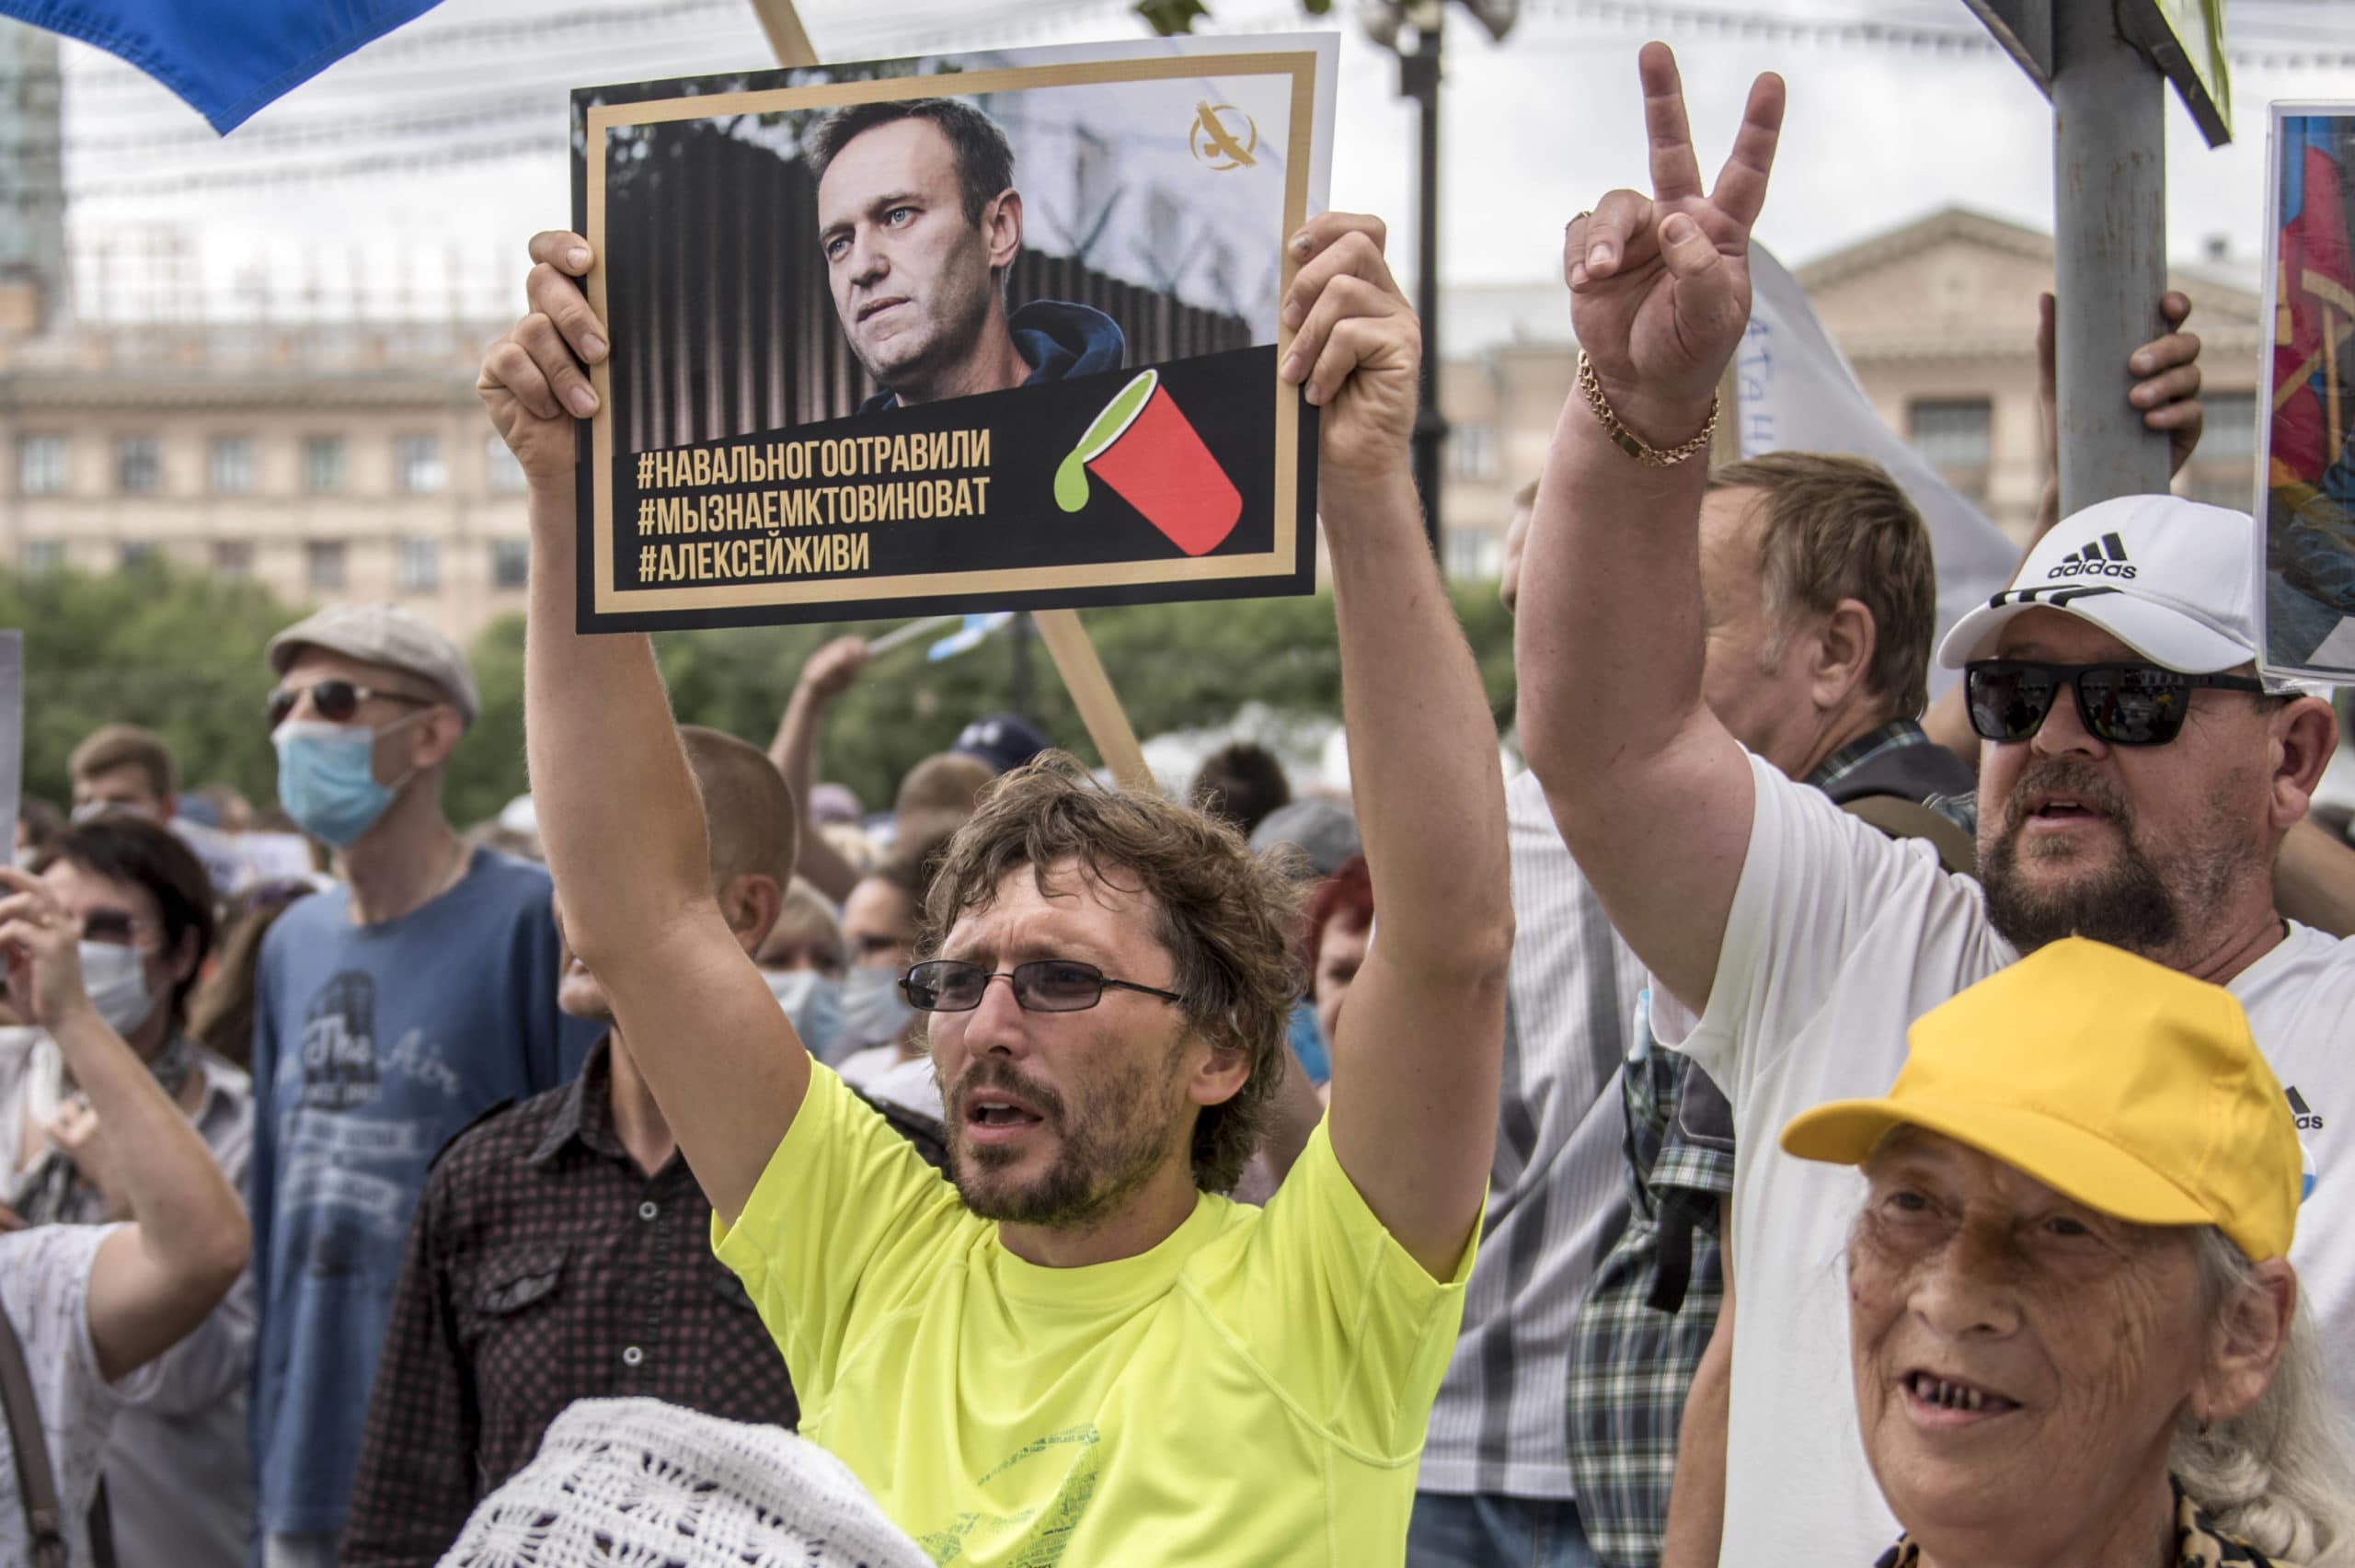 A man holds a poster with a portrait of Alexei Navalny reading "Navalny was poisoned, we know who is to blame, Alexei you must live" during an unsanctioned protest in support of Sergei Furgal, the governor of the Khabarovsk region, in Khabarovsk, 6,100 kilometers (3,800 miles) east of Moscow, Russia, Saturday, Aug. 22, 2020. Russian dissident Alexei Navalny, who is in a coma after a suspected poisoning, has arrived in Berlin on a special flight for treatment by specialists. The politician and corruption investigator who is one of Russian President Vladimir Putin's fiercest critics was thought to be in stable condition on arrival Saturday and is to be treated in the German capital's main hospital. (AP Photo/Igor Volkov)/XAZ105/20235398218764//2008221304